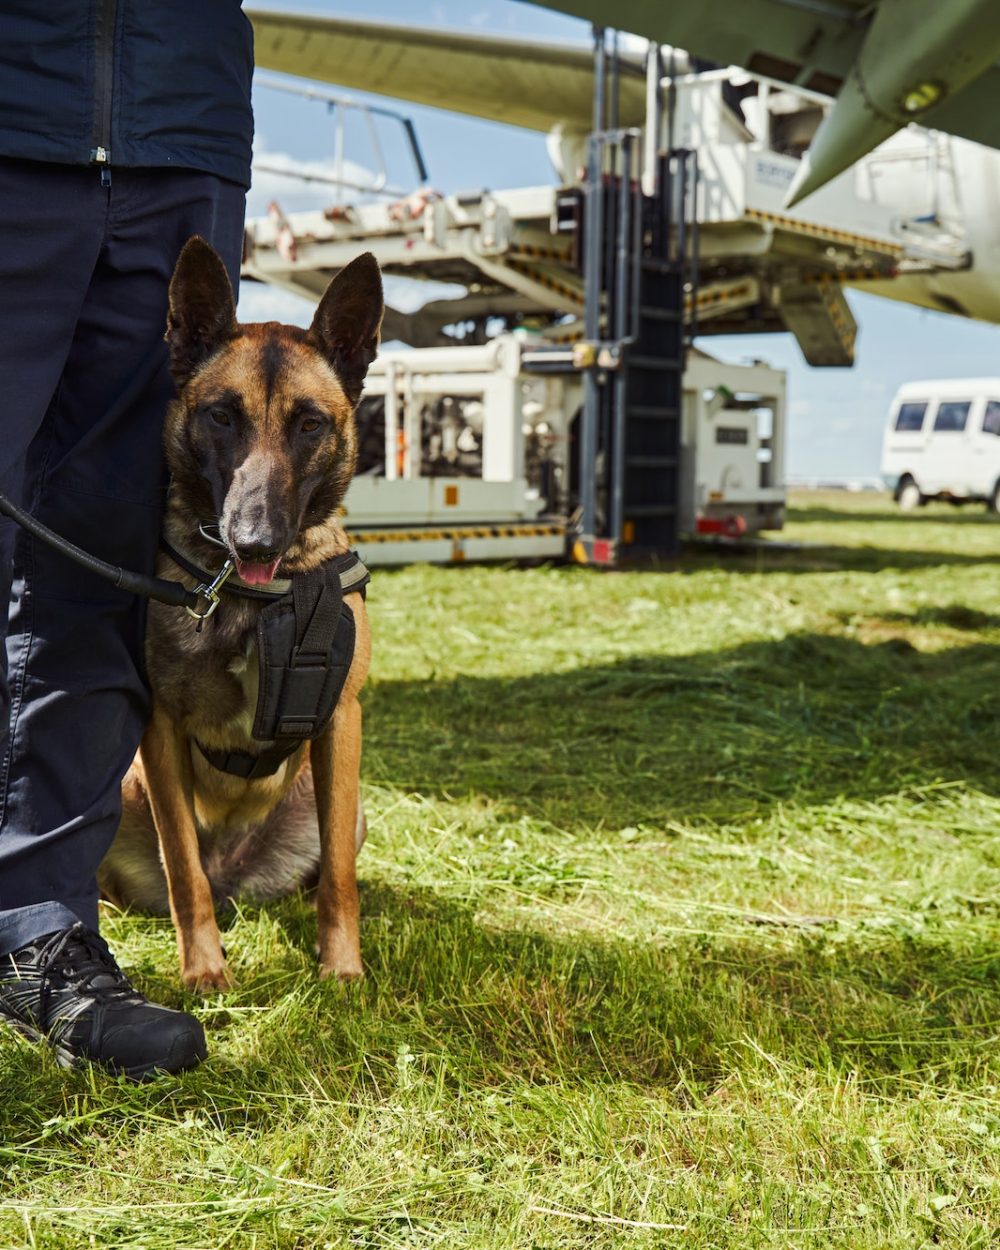 Security police dog on duty with officer at aerodrome